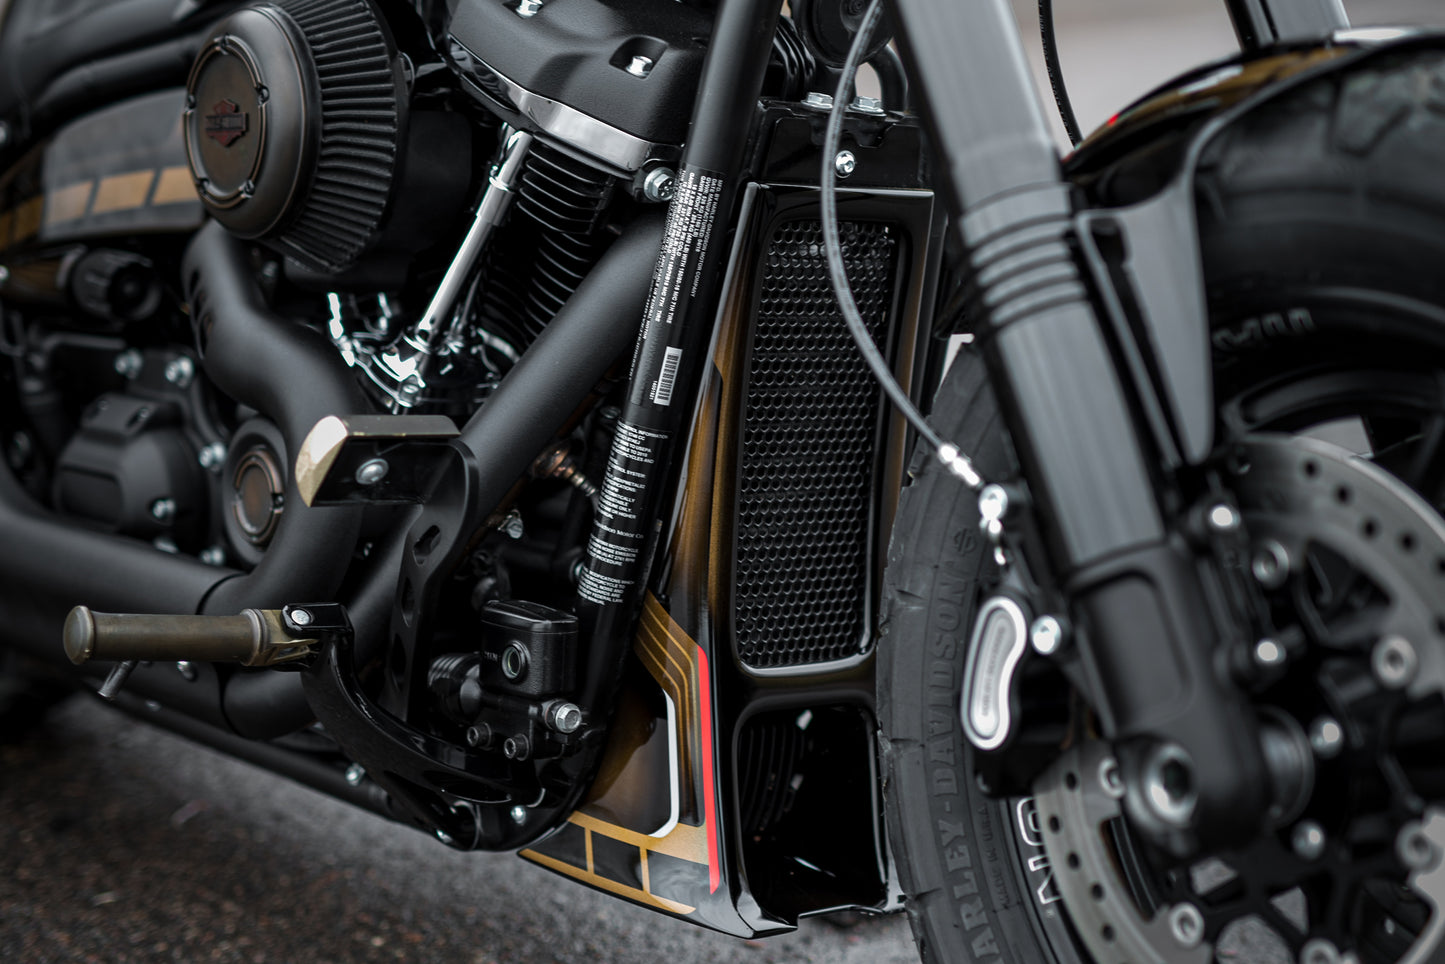 Zoomed Harley Davidson motorcycle with "Aggressor" series radiator cover from the side